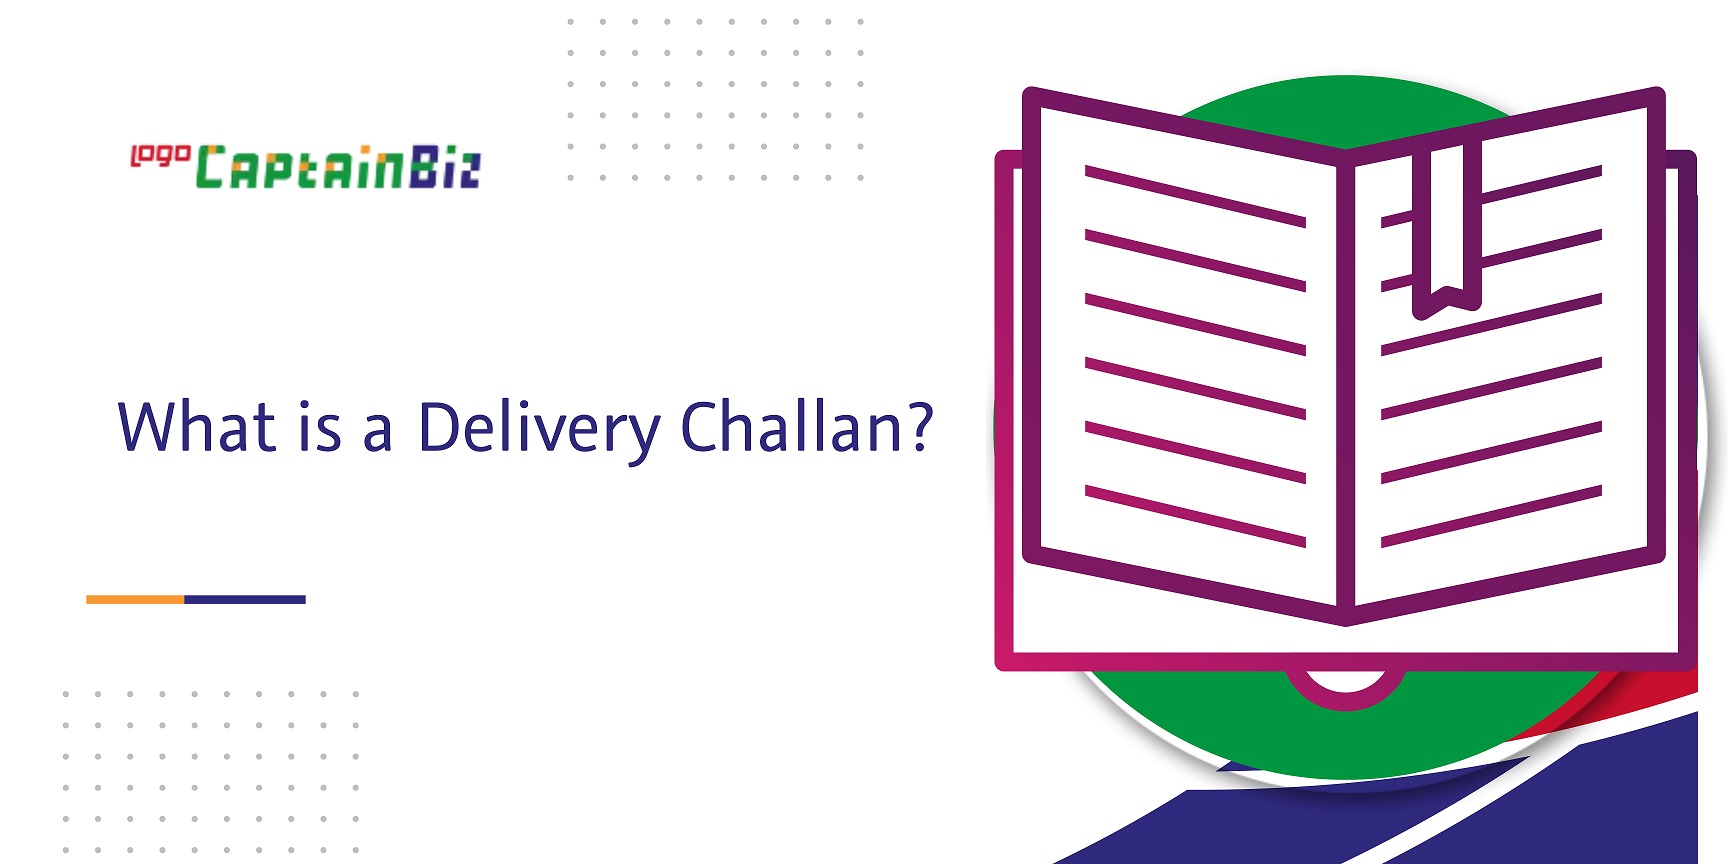 CaptainBiz: what is a delivery challan